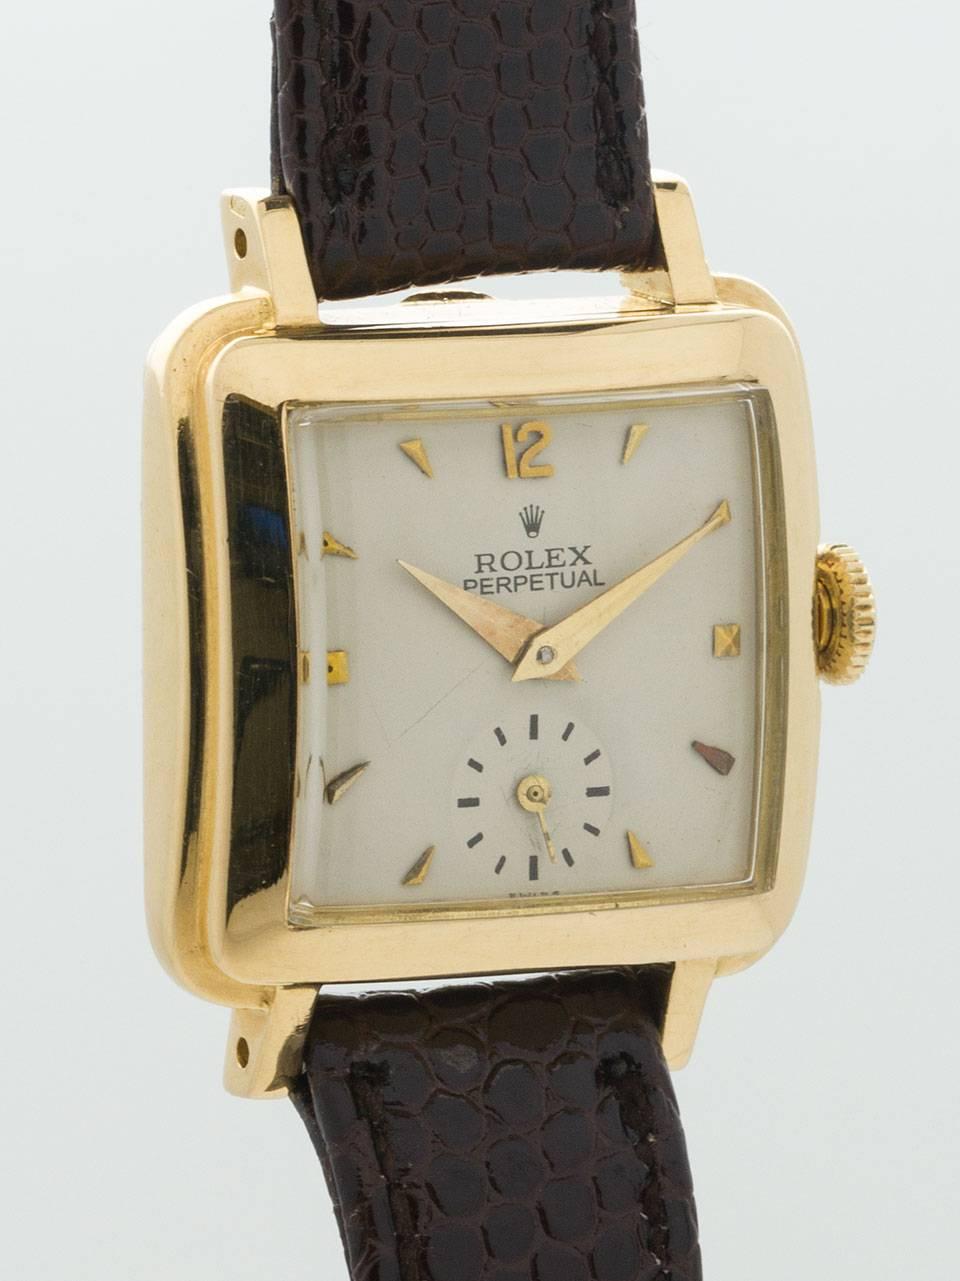 A scarce vintage Lady Rolex Square Bubbleback 18K Yellow Gold Wristwatch ref 4663 circa 1950. Featuring 24.5 X 31mm square, stepped thick case with extended lugs and curved crystal. With very pleasing restored antique white dial with gold applied